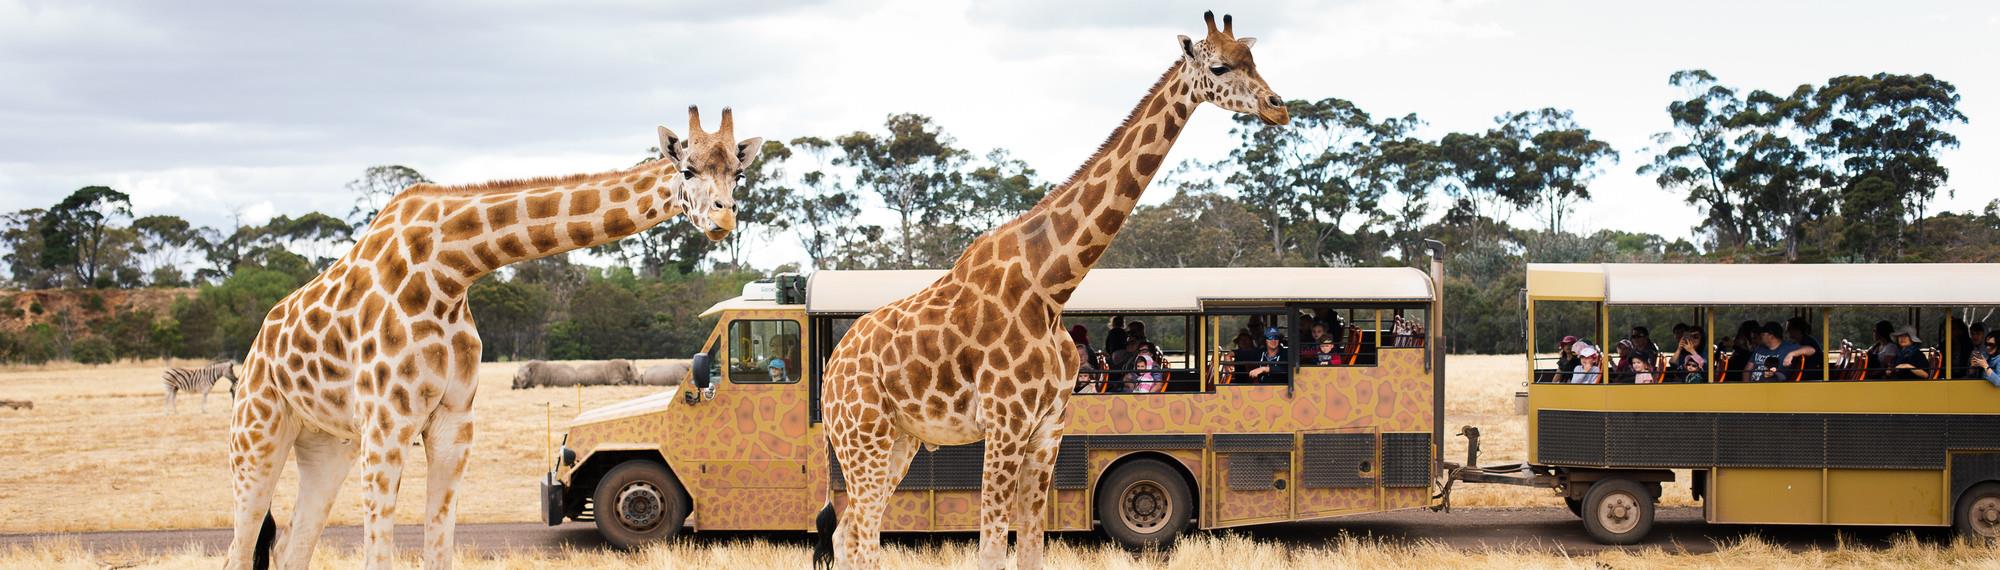 Two Giraffes lined up in front of a Safari Bus on the Savannah.